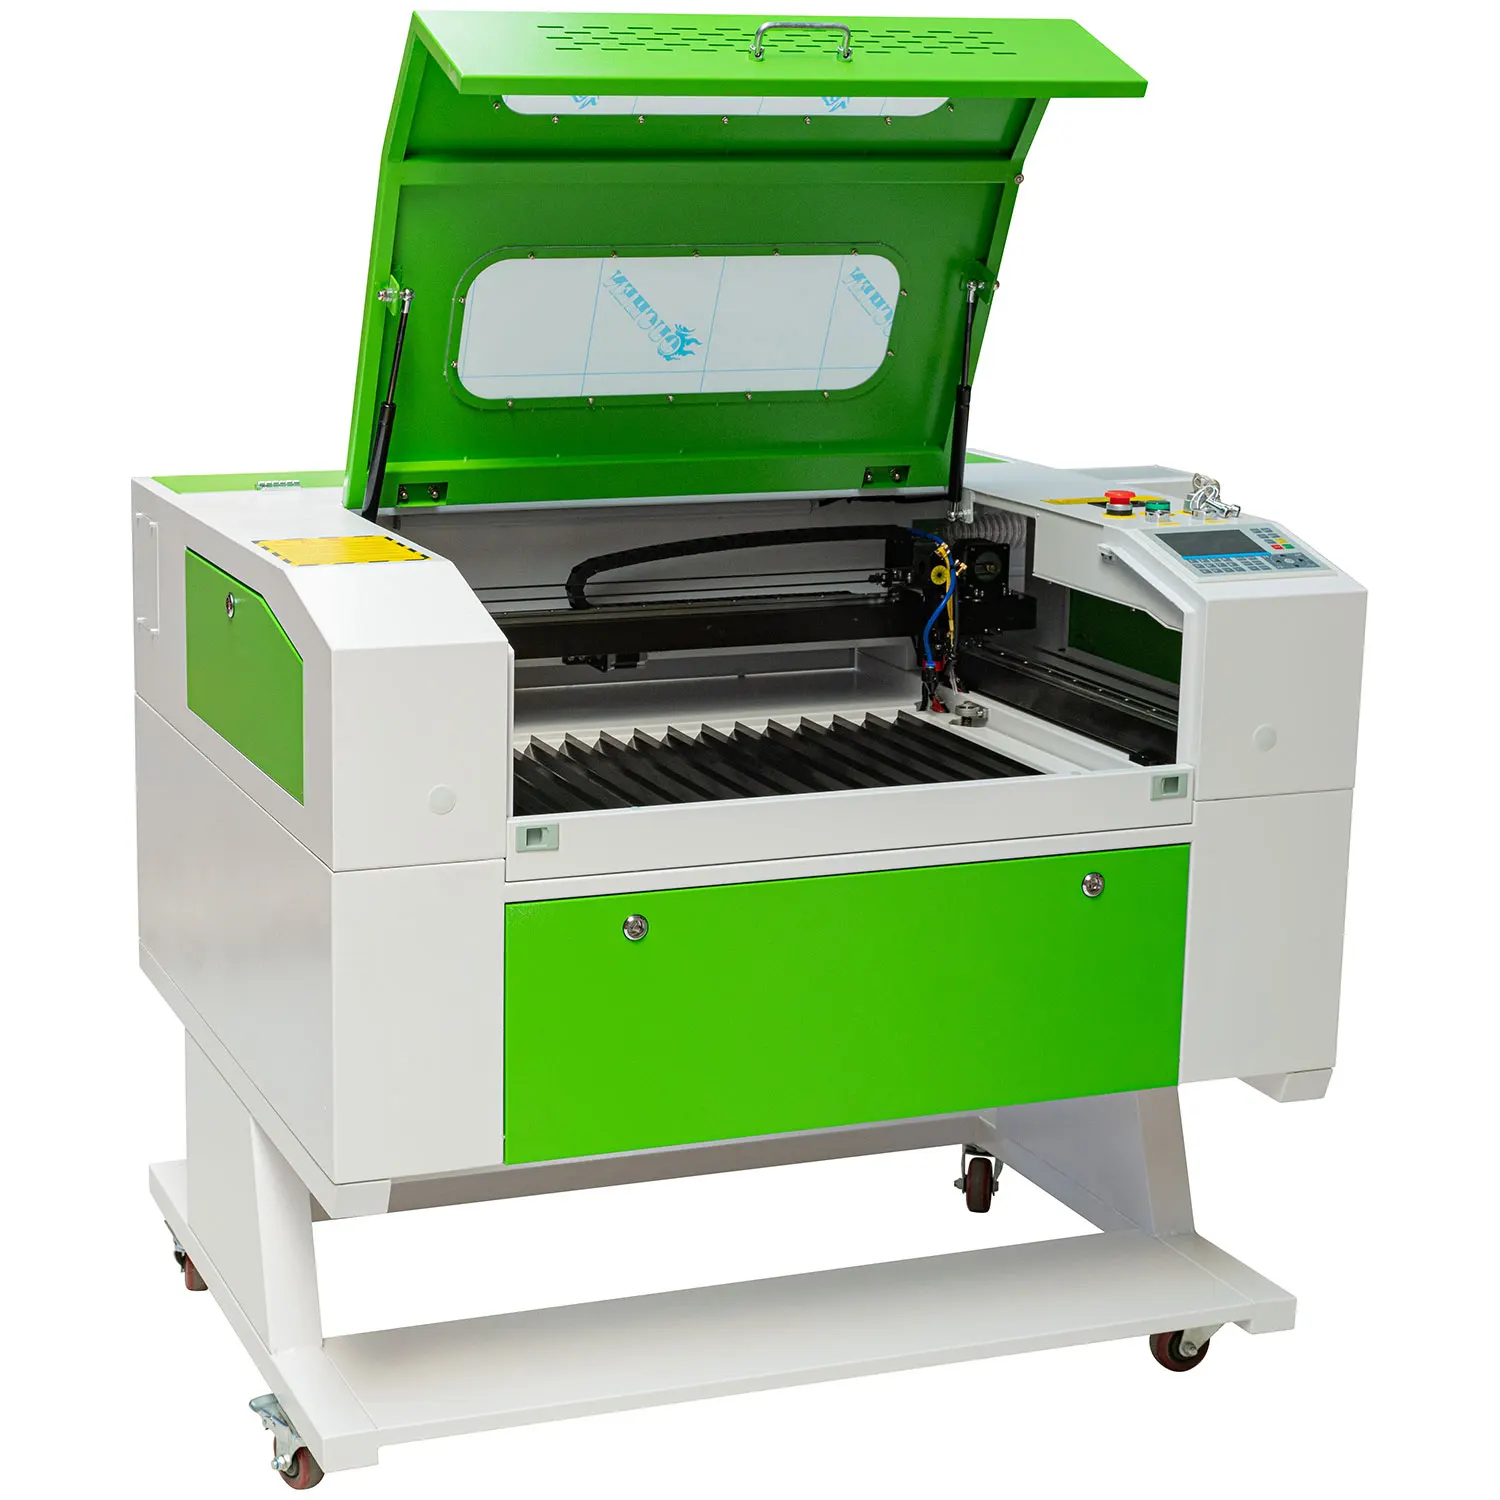 20 x 28in 500mm x 700mm 90W CO2 Laser Cutter Engraving Machine With USB Port and Electric Lifting Worktable